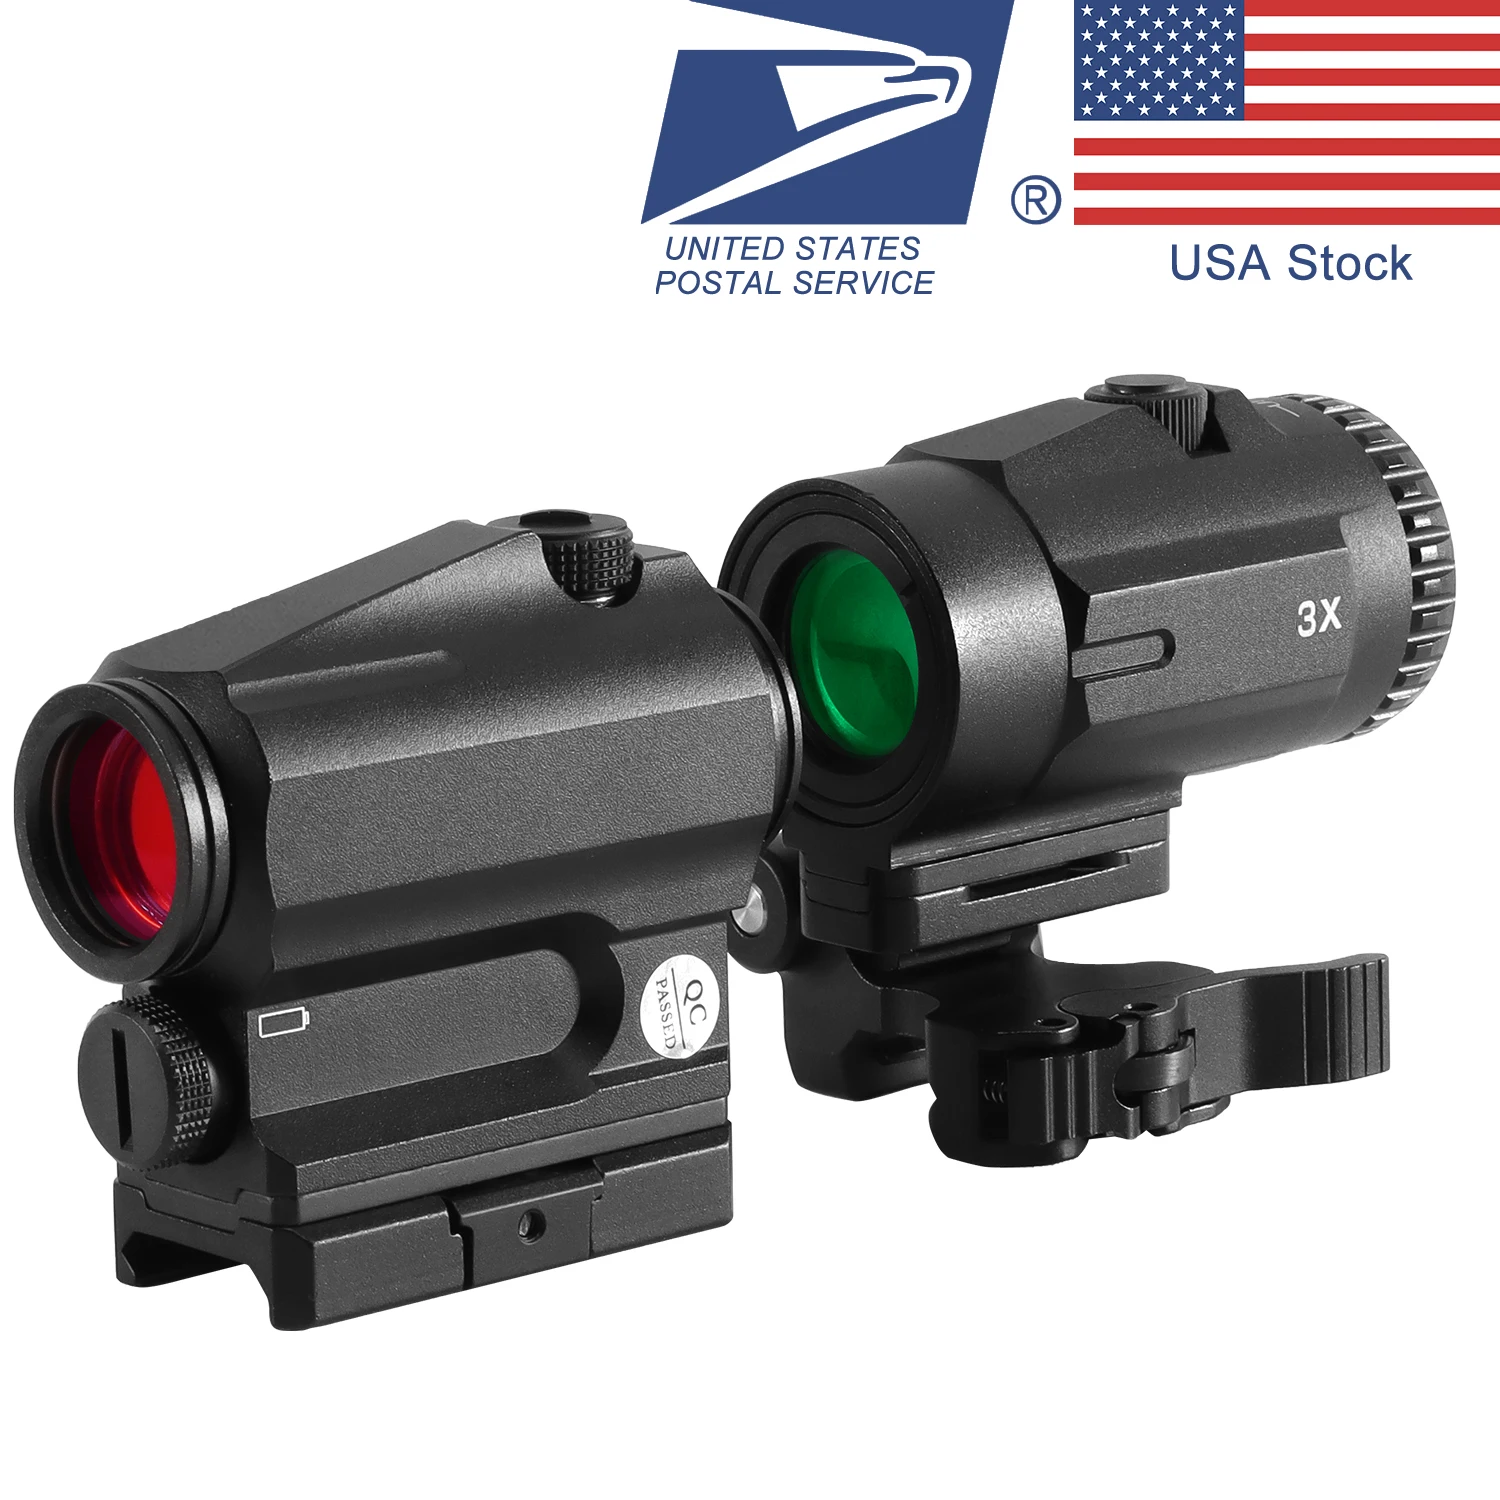 

Sparc 1X22 Collimator Holographic 3X Magnification Sight Red Dot Reflex Sight 20Mm Rail Mounts 558 Airsoft Snipe Rifle AR-15